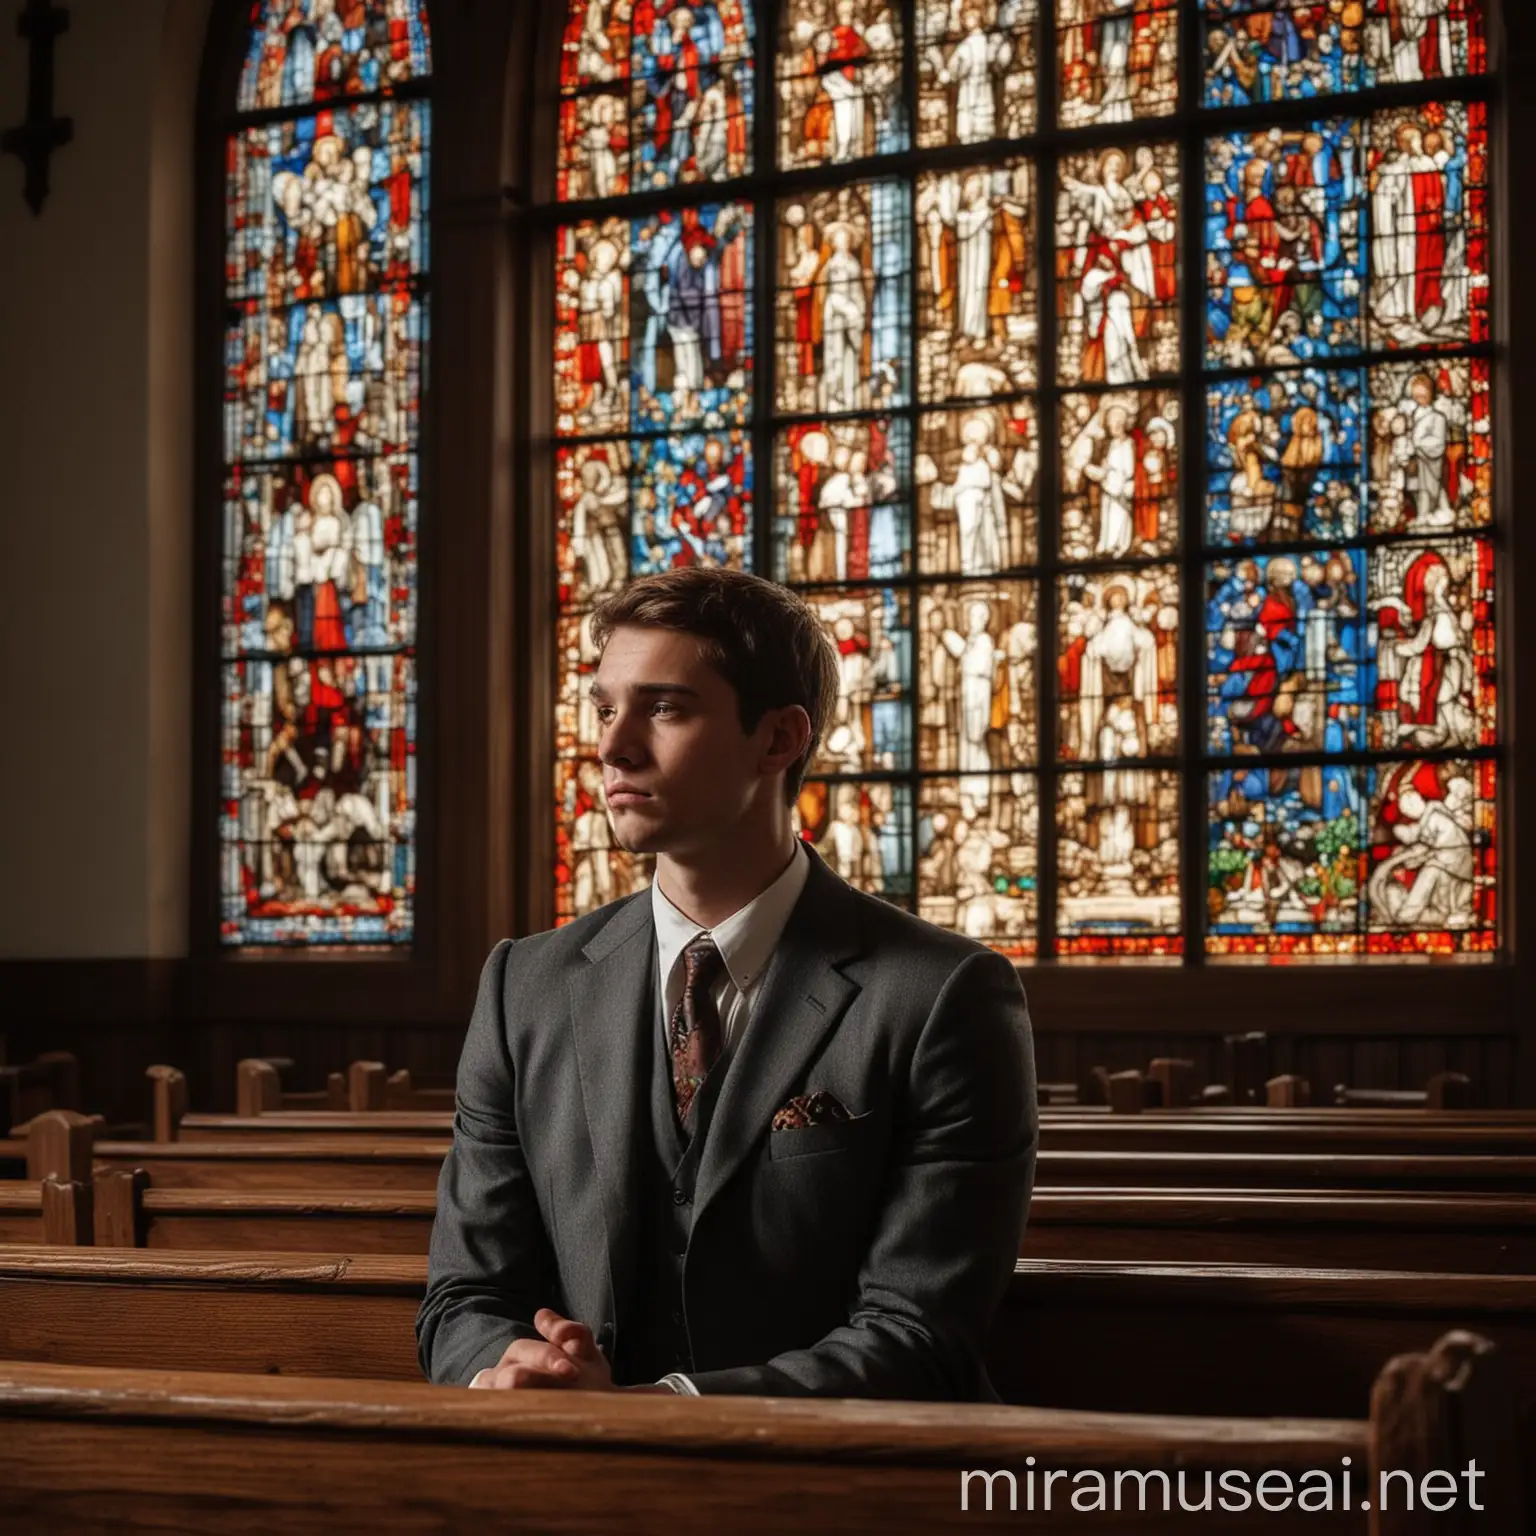 Create a visual arts artwork with a close-up view of a broad-shouldered 27-year-old man with brown hair, dressed in a formal suit, sitting in one of the wooden seats of a dark church. The man should be positioned towards the center of the composition, filling the frame to showcase his tired expression and weary posture. The stained glass window on the left side of the photo should be partially visible in the background, casting colorful patterns of light across the man's figure and the church interior. The white and wooden details of the church's interior should also be prominently featured, adding to the atmosphere of reverence and introspection. The close-up perspective should capture the man's emotional numbness and fatigue, emphasizing the inner turmoil and contemplative mood of the scene.